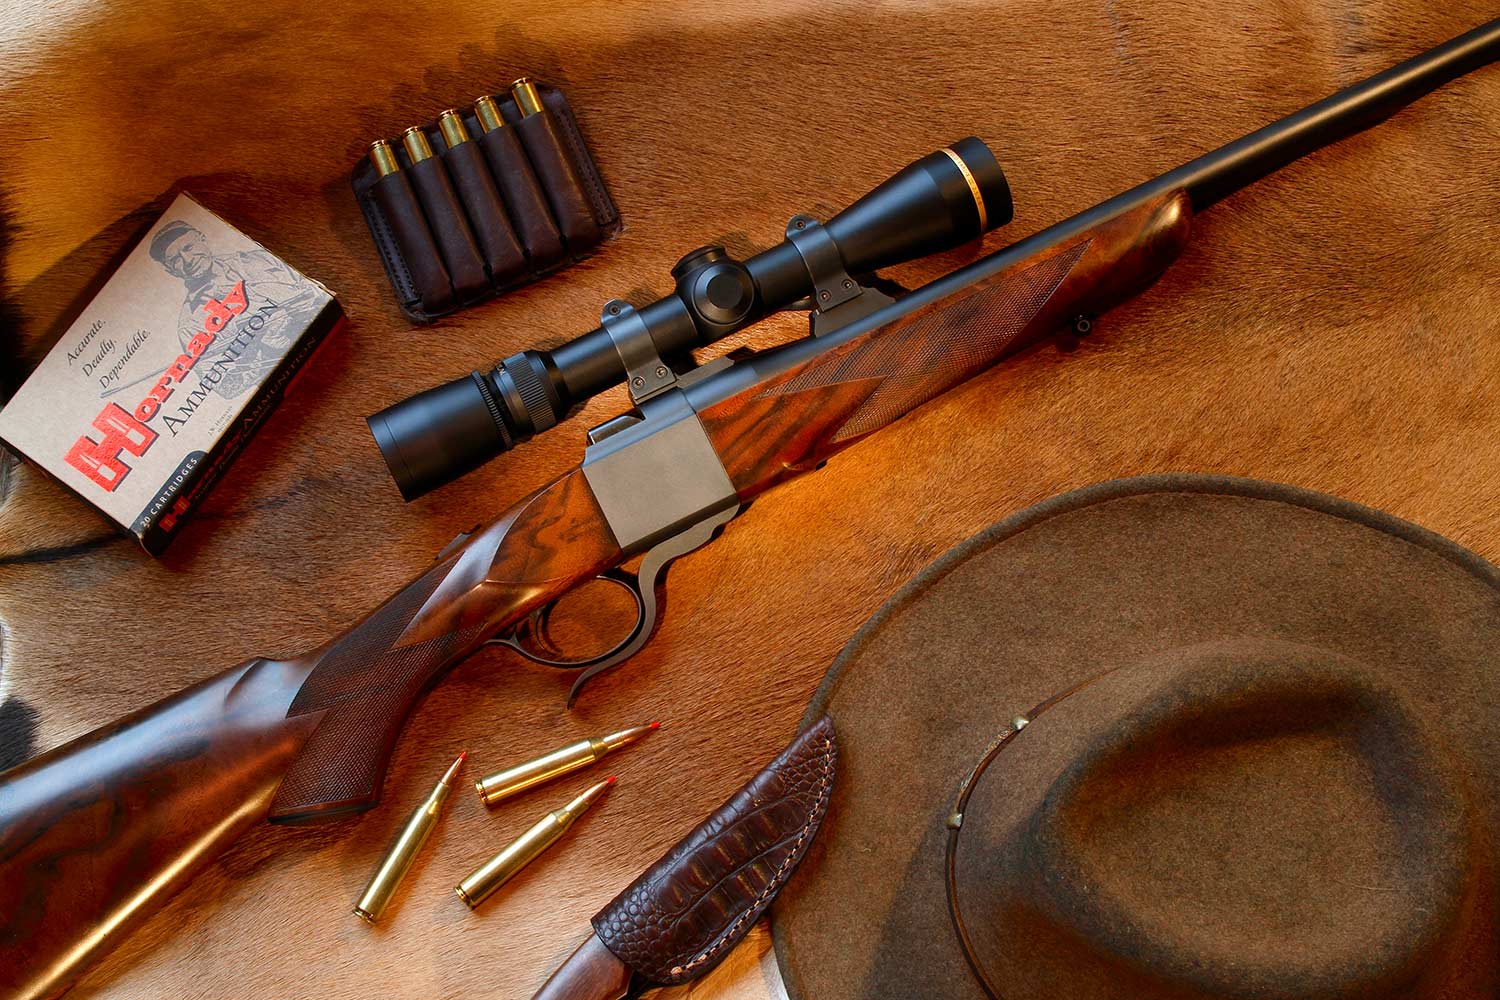 A hunting rifle and western hunting gear on a deer skin.